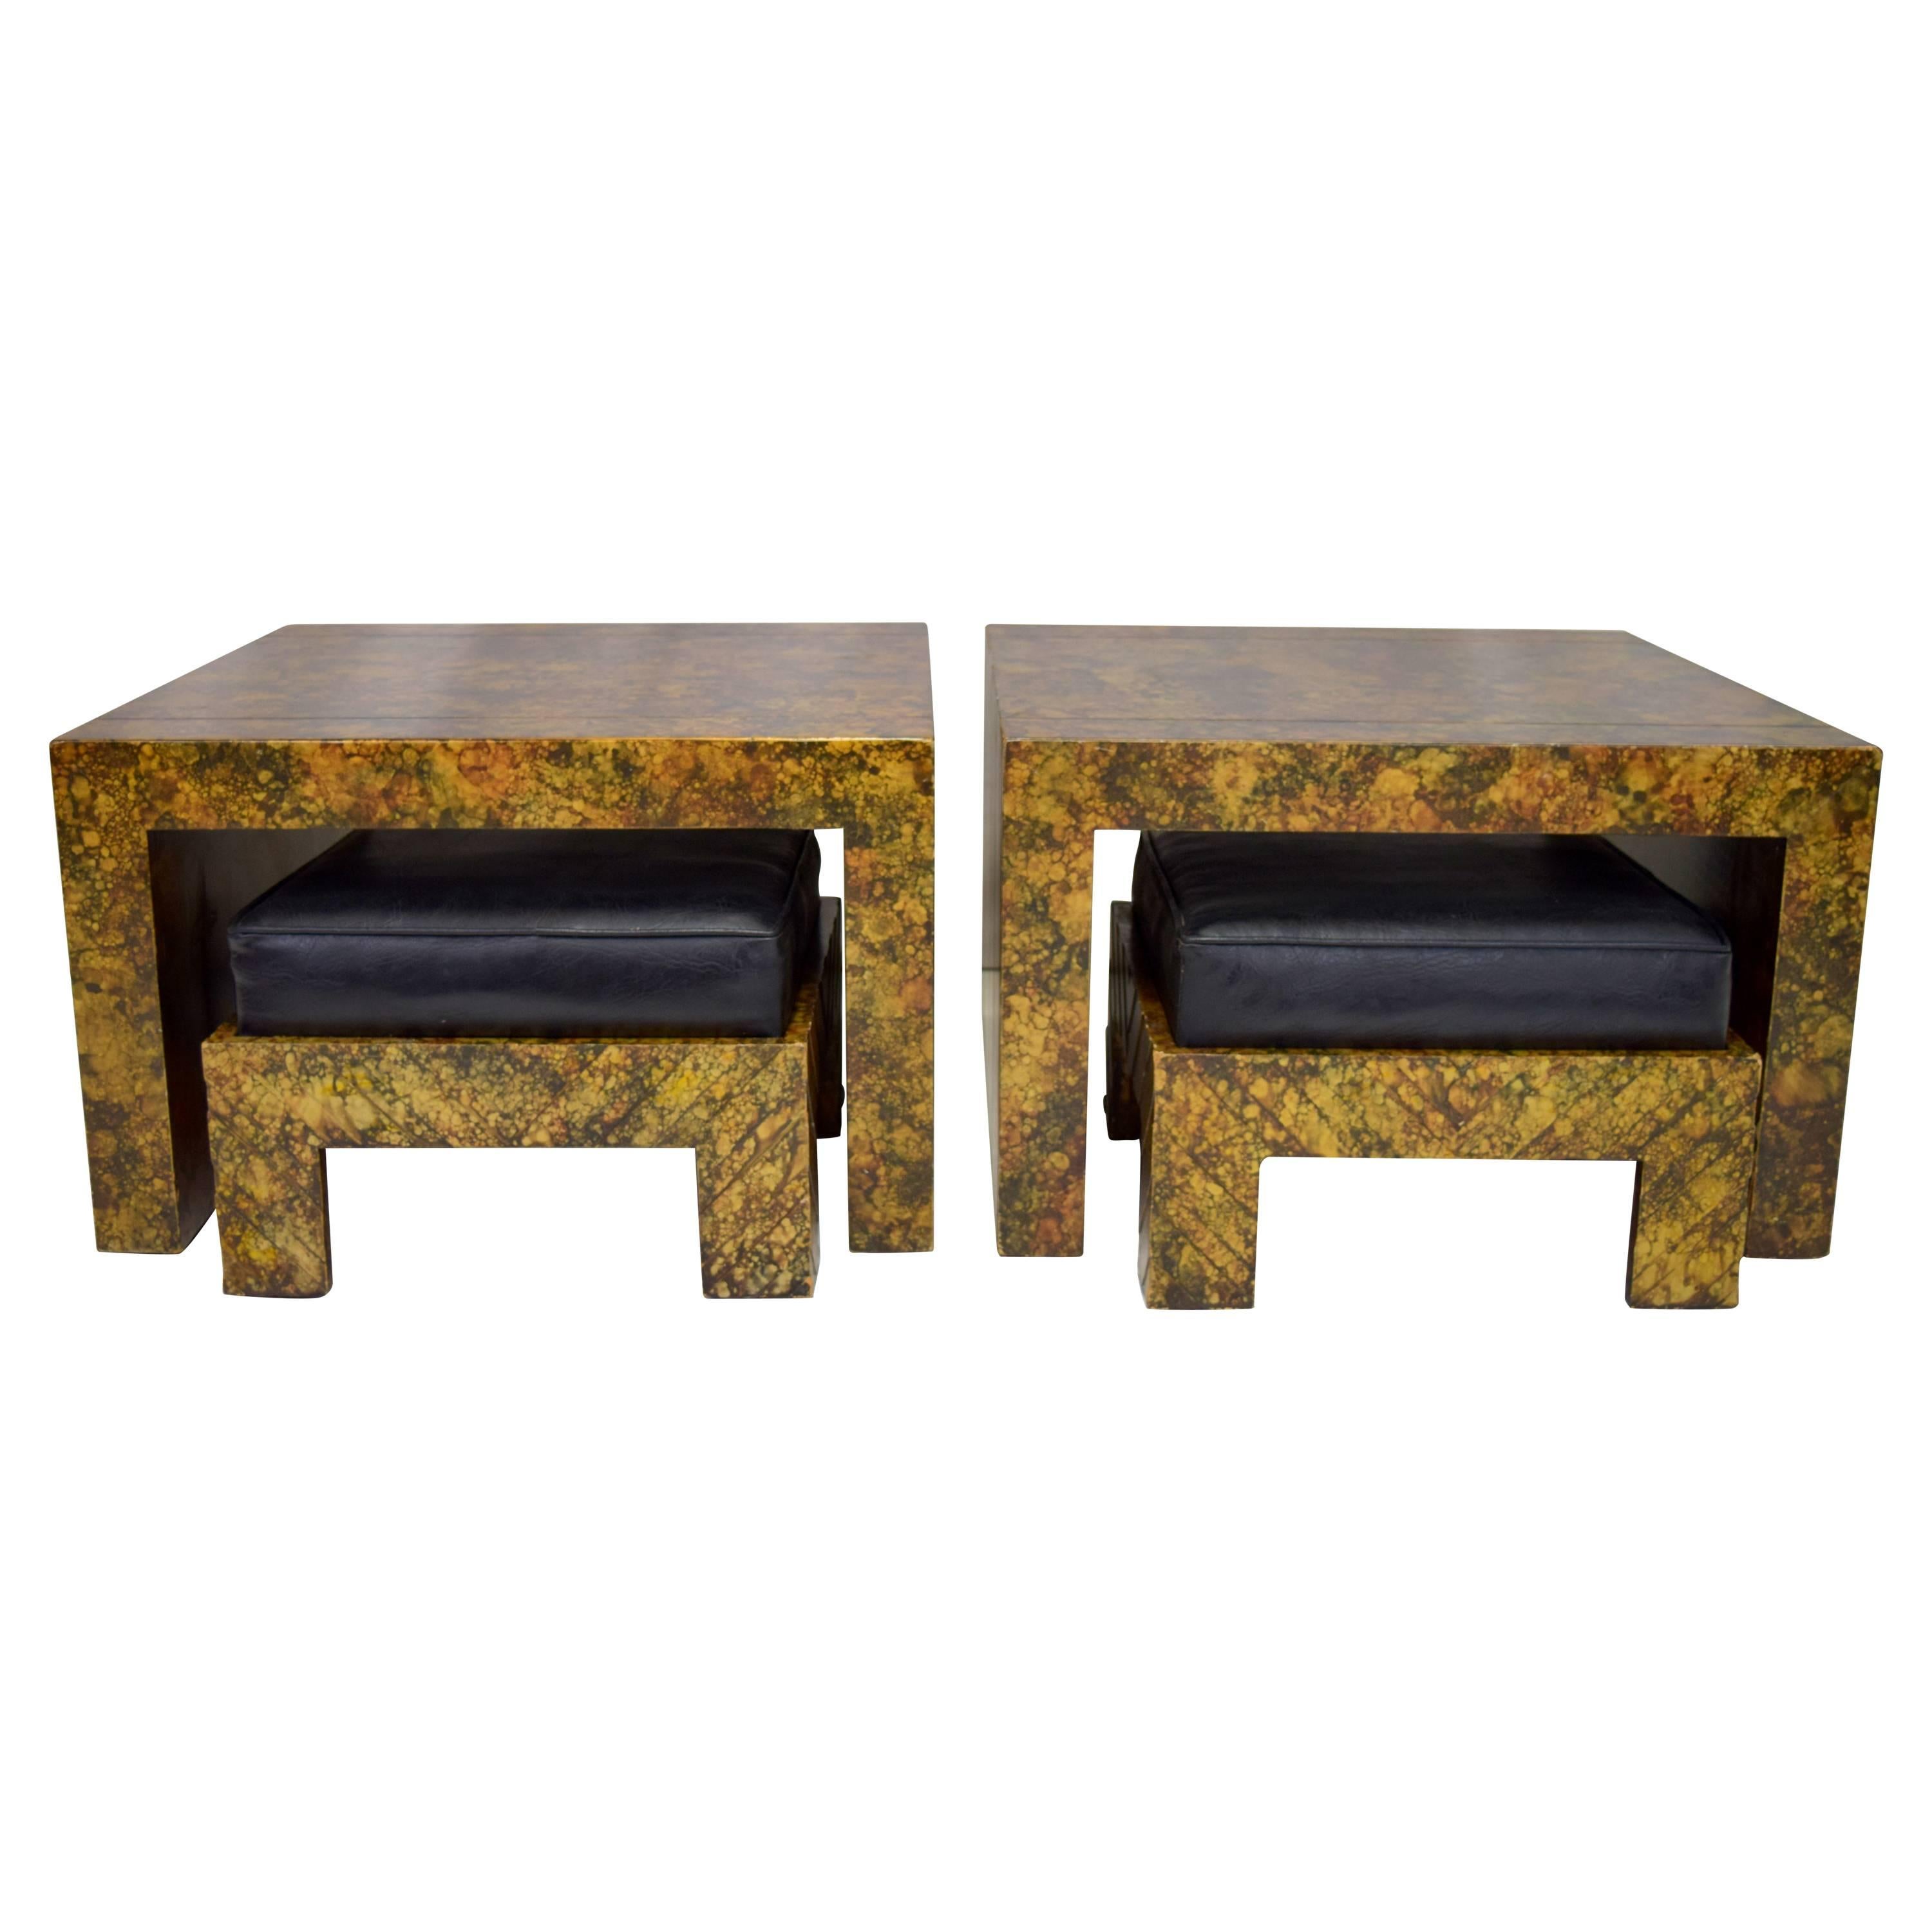 Pair of Phyllis Morris Oil Drop Finish End Tables with Nesting Ottomans